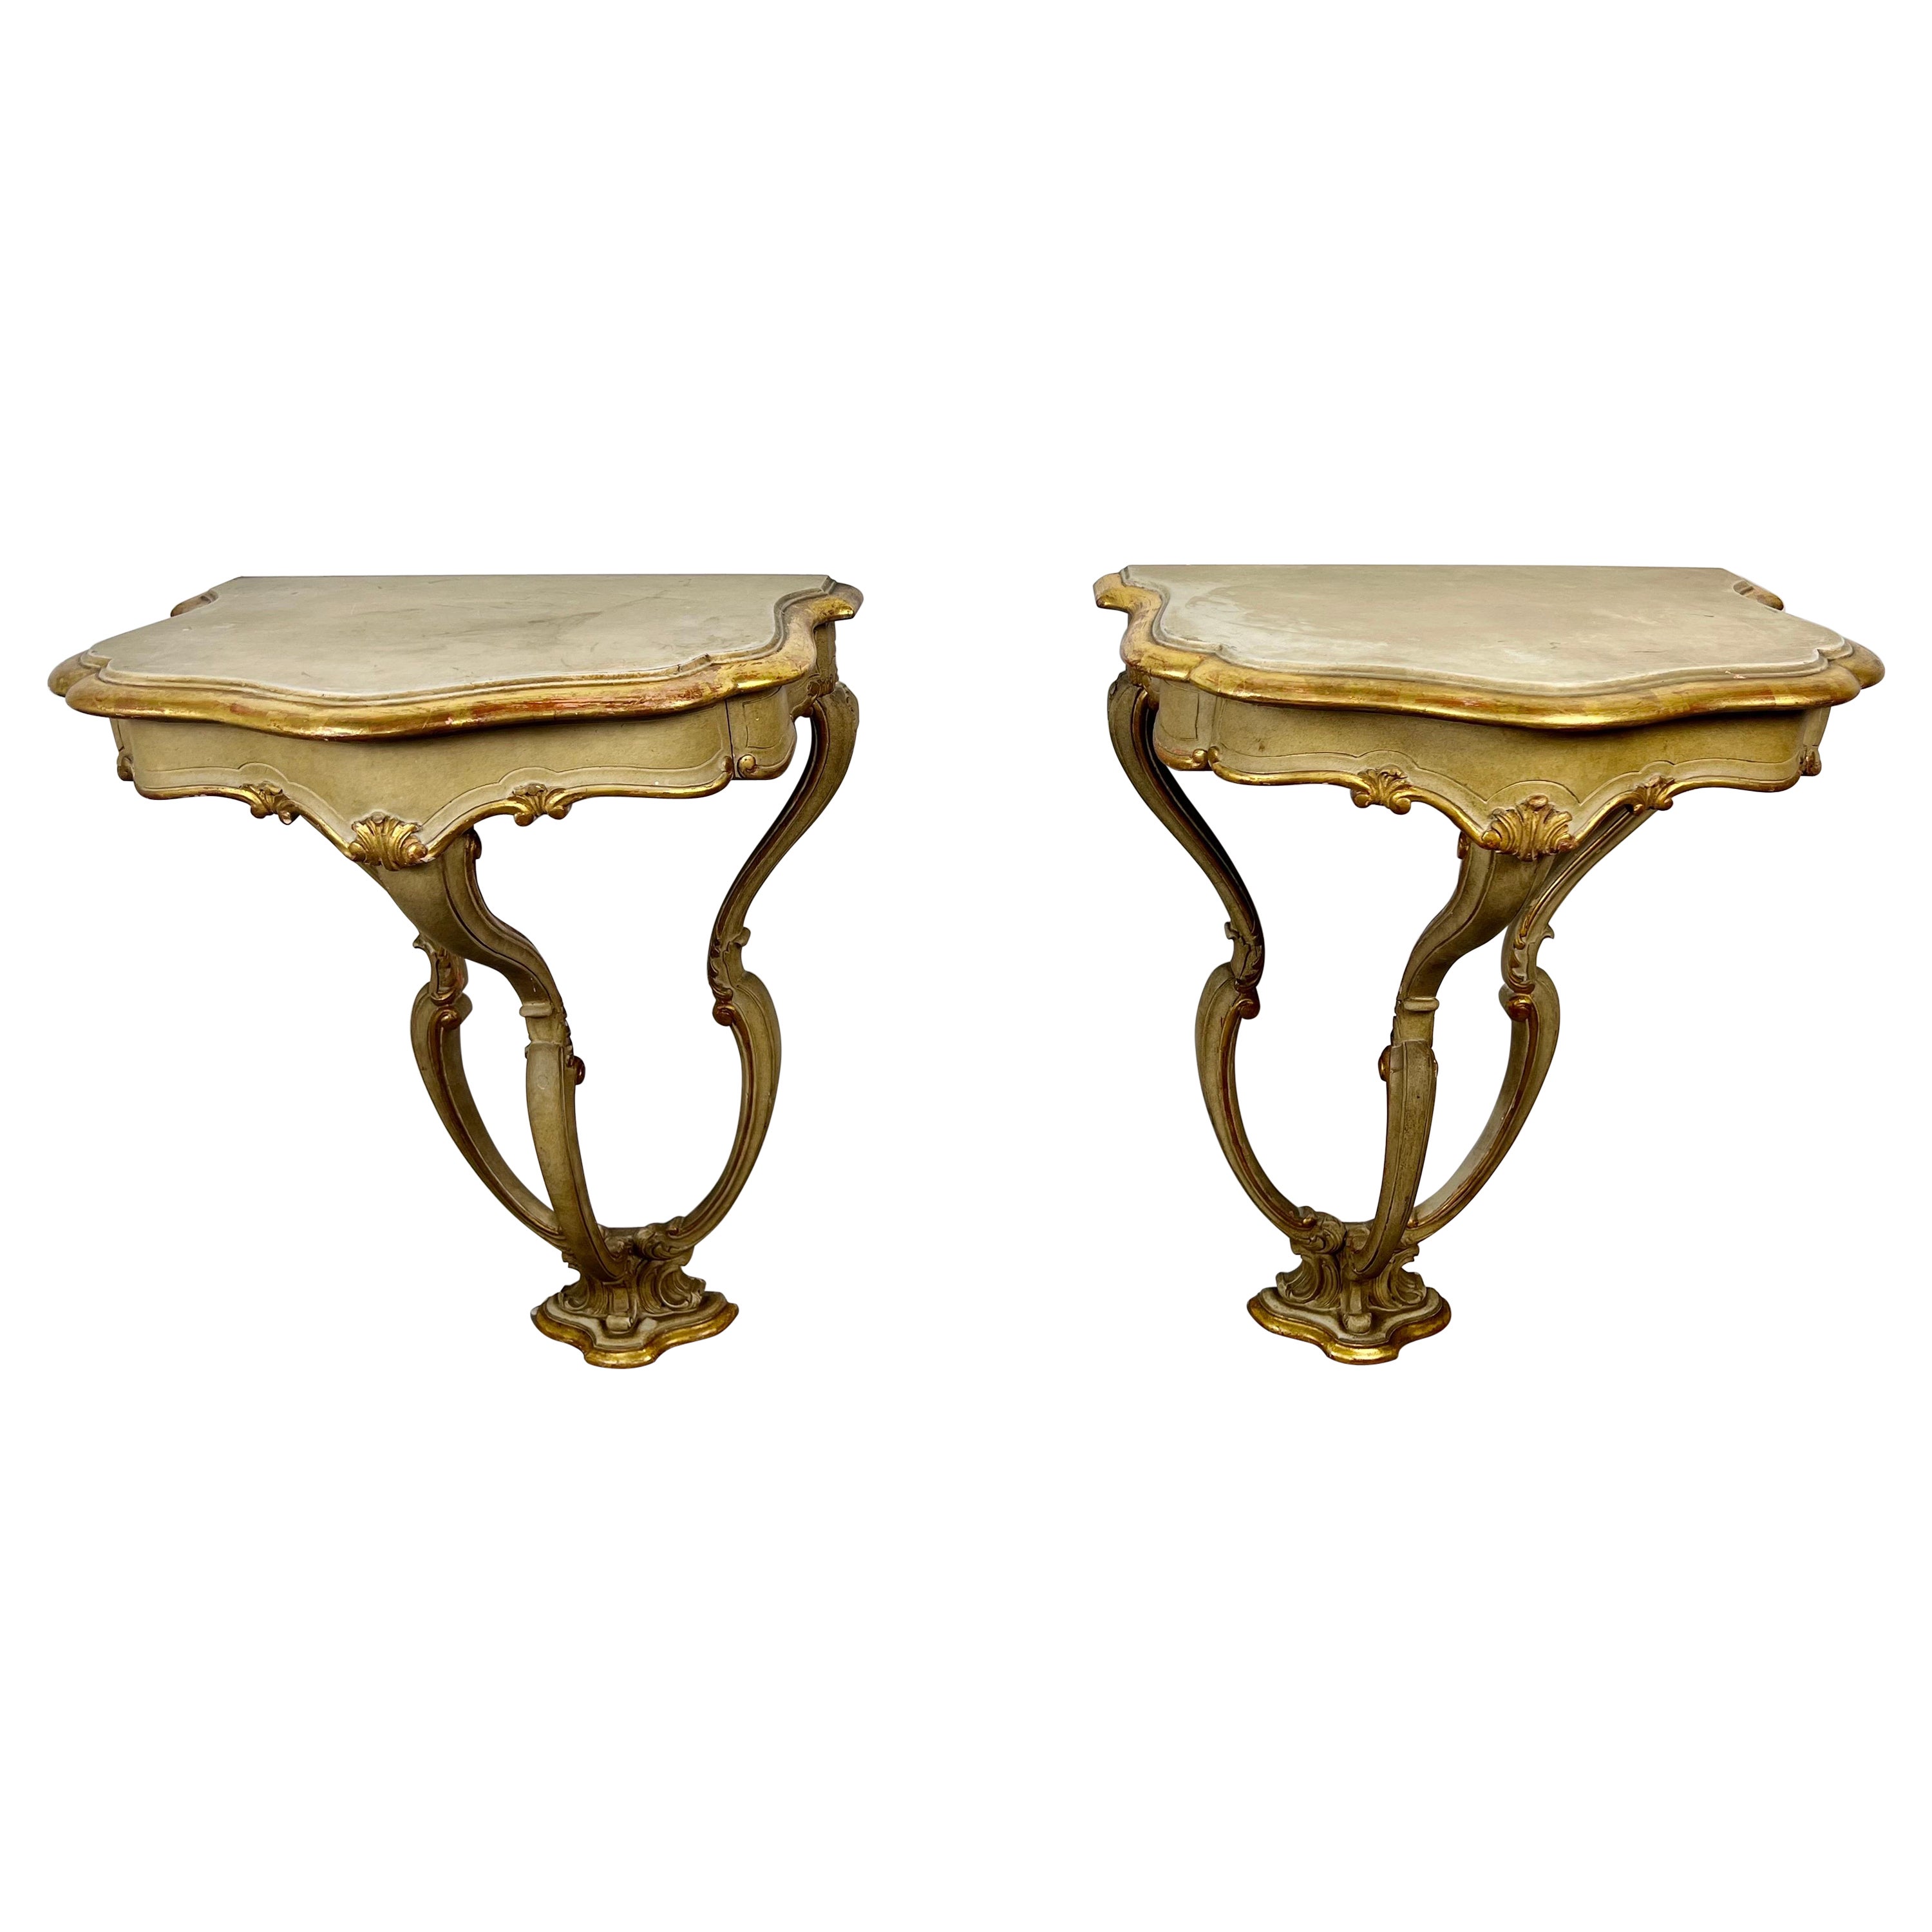 Pair of Italian Painted & Parcel Gilt Consoles w/ Drawers